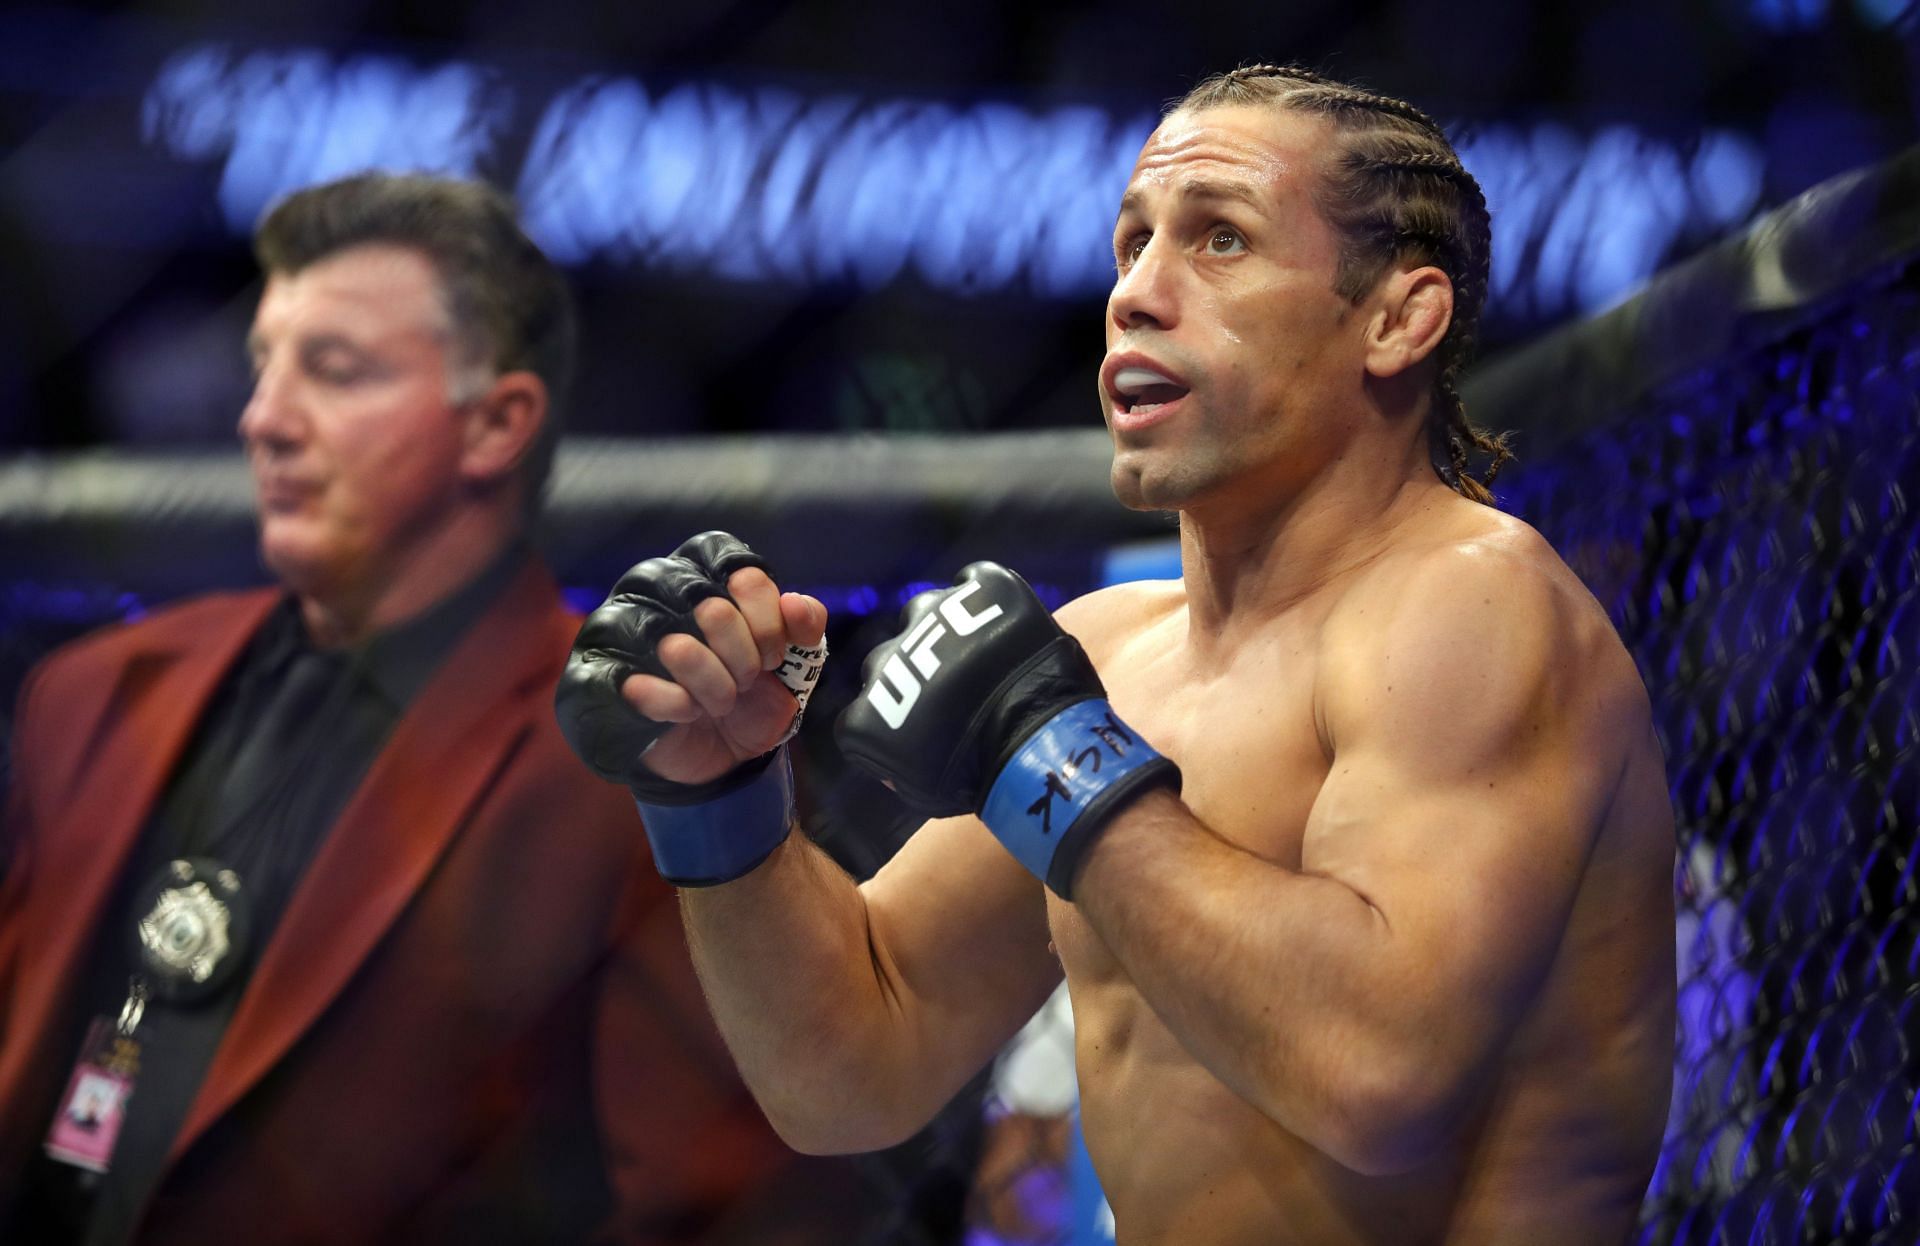 Urijah Faber&#039;s record stands at 35-11